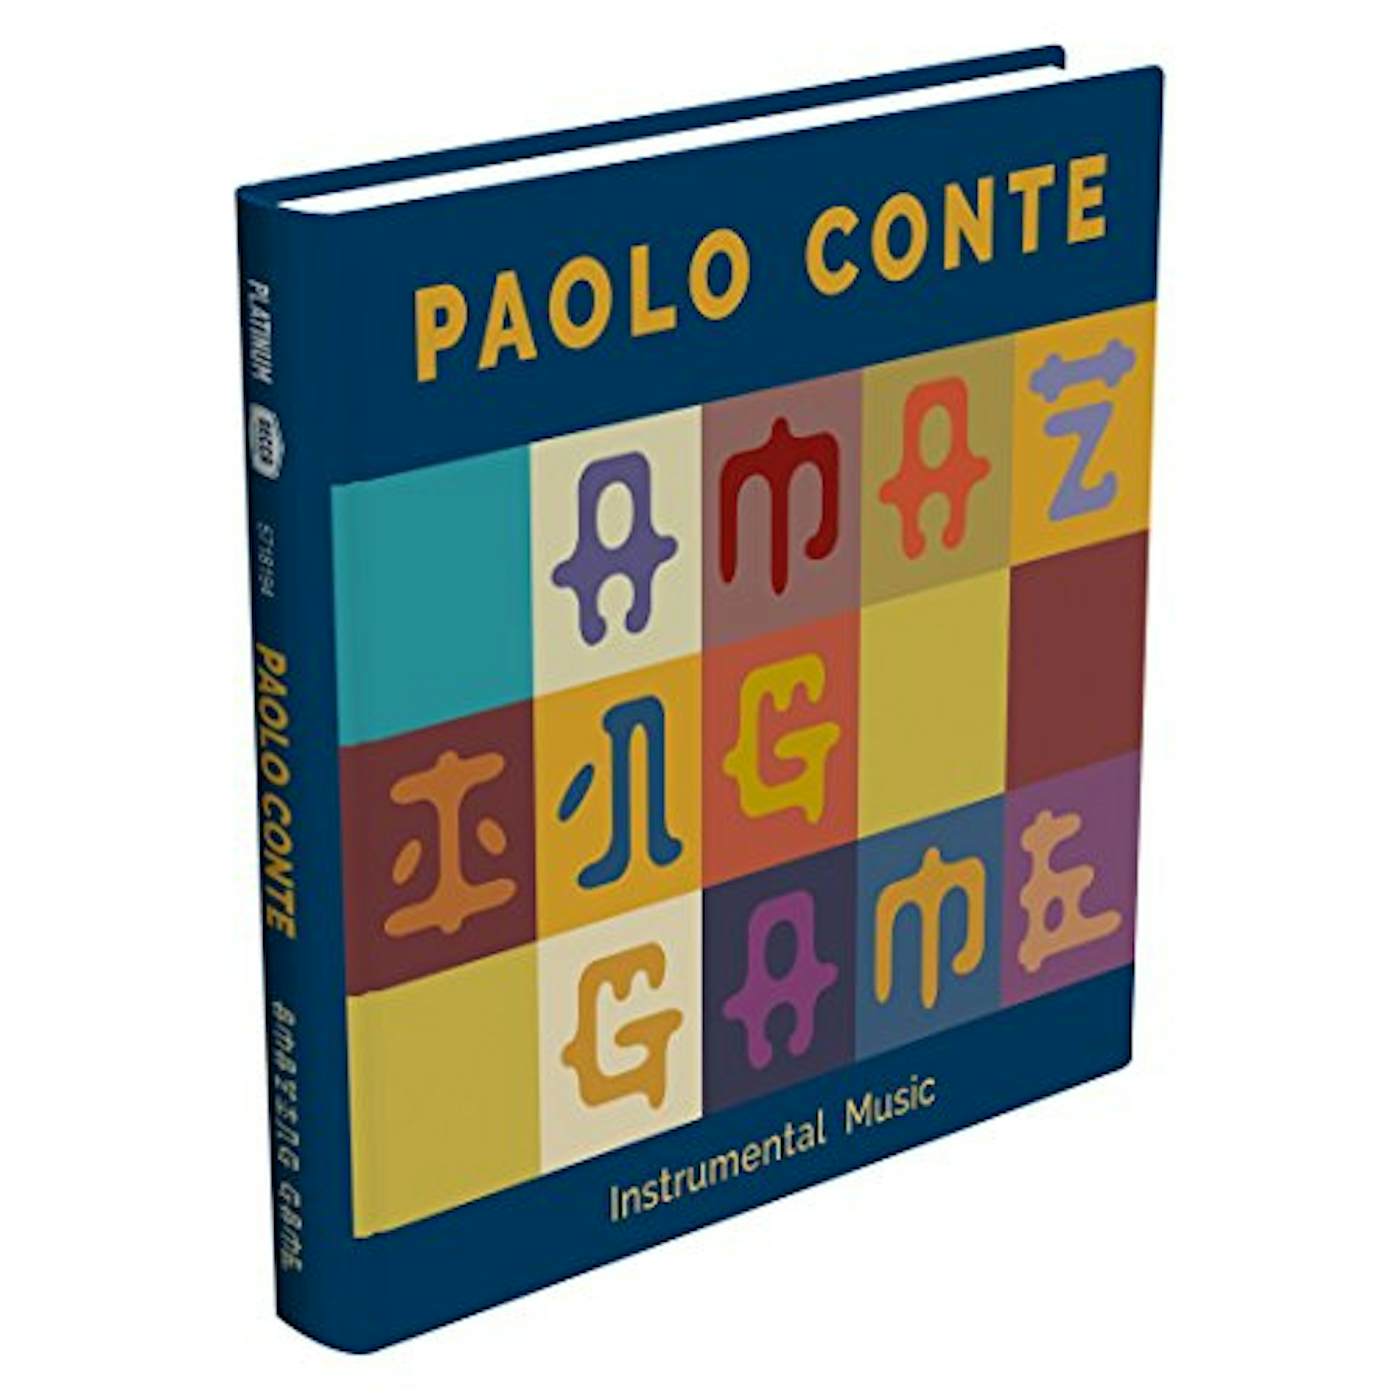 Paolo Conte AMAZING GAME CD